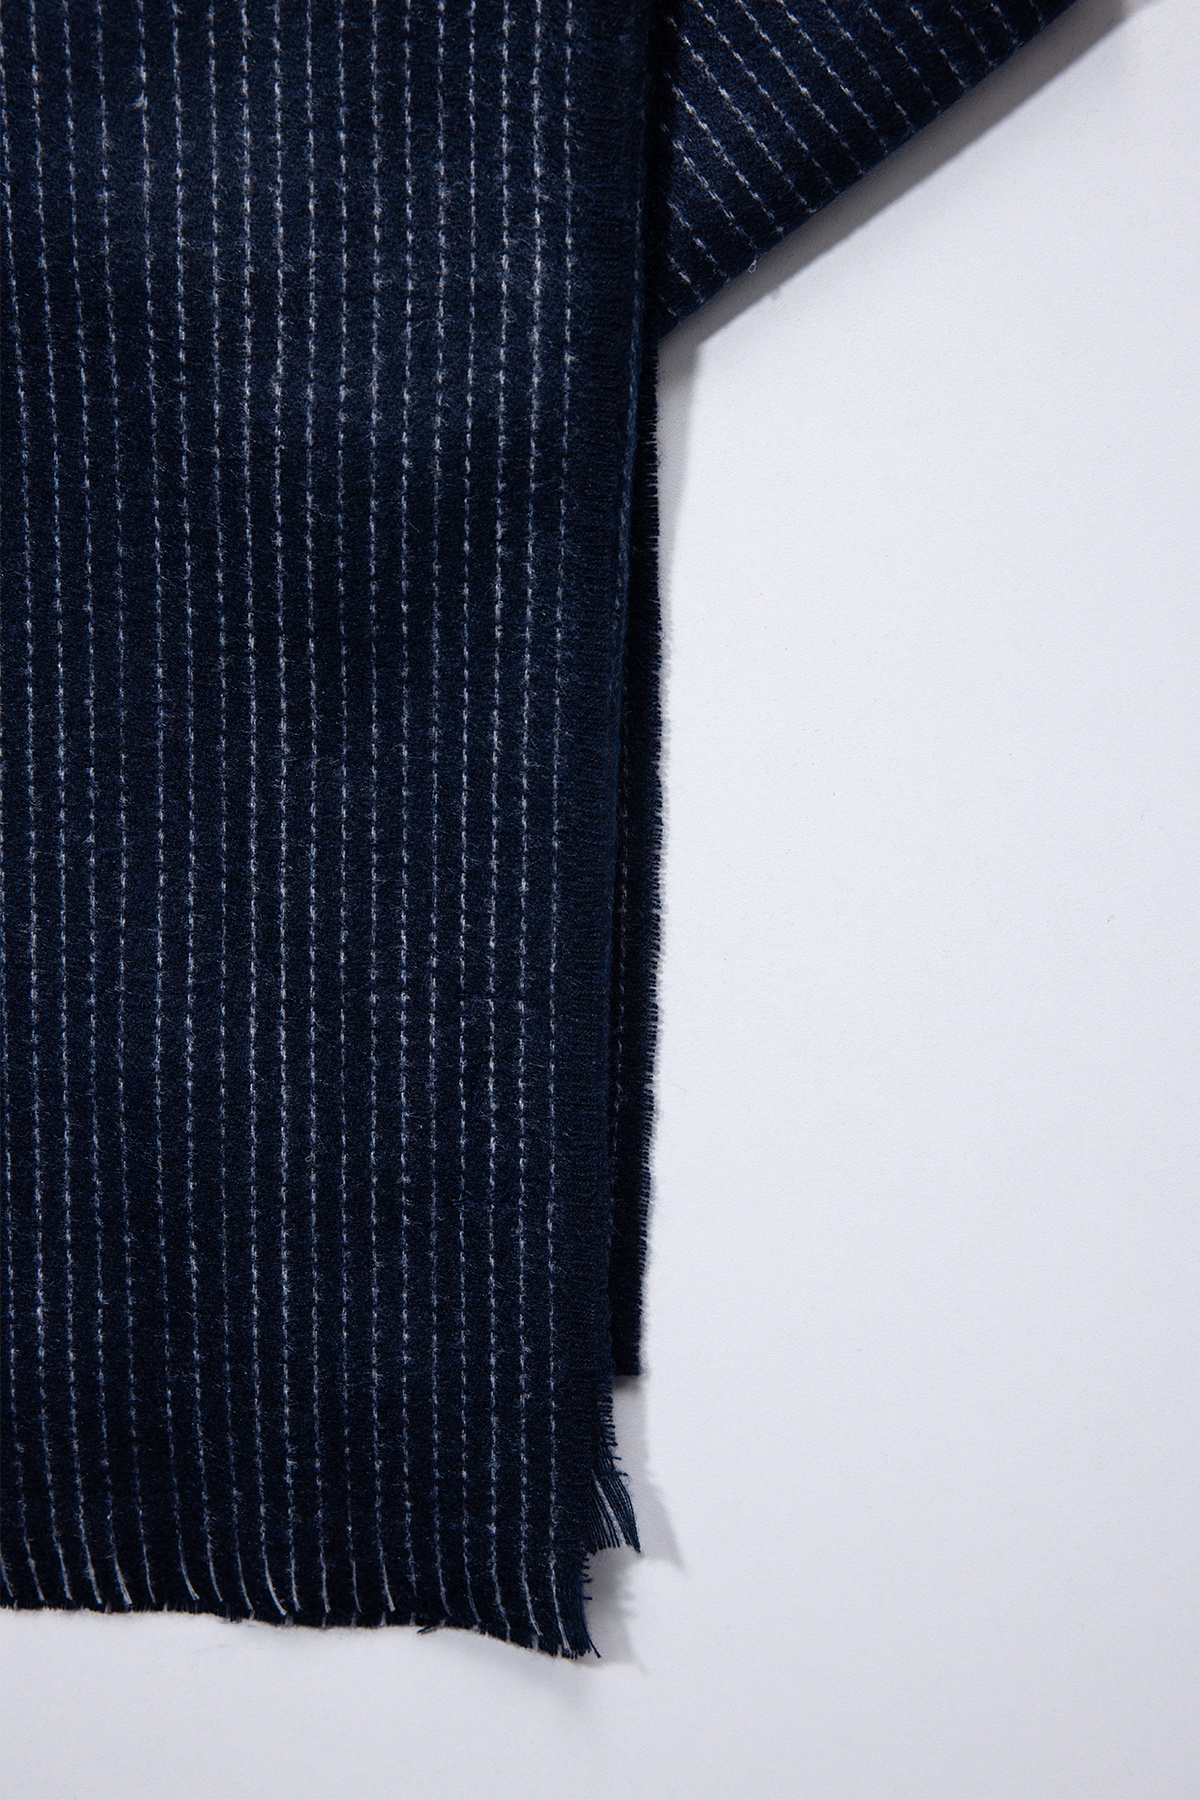 Woven Navy Blue Scarf